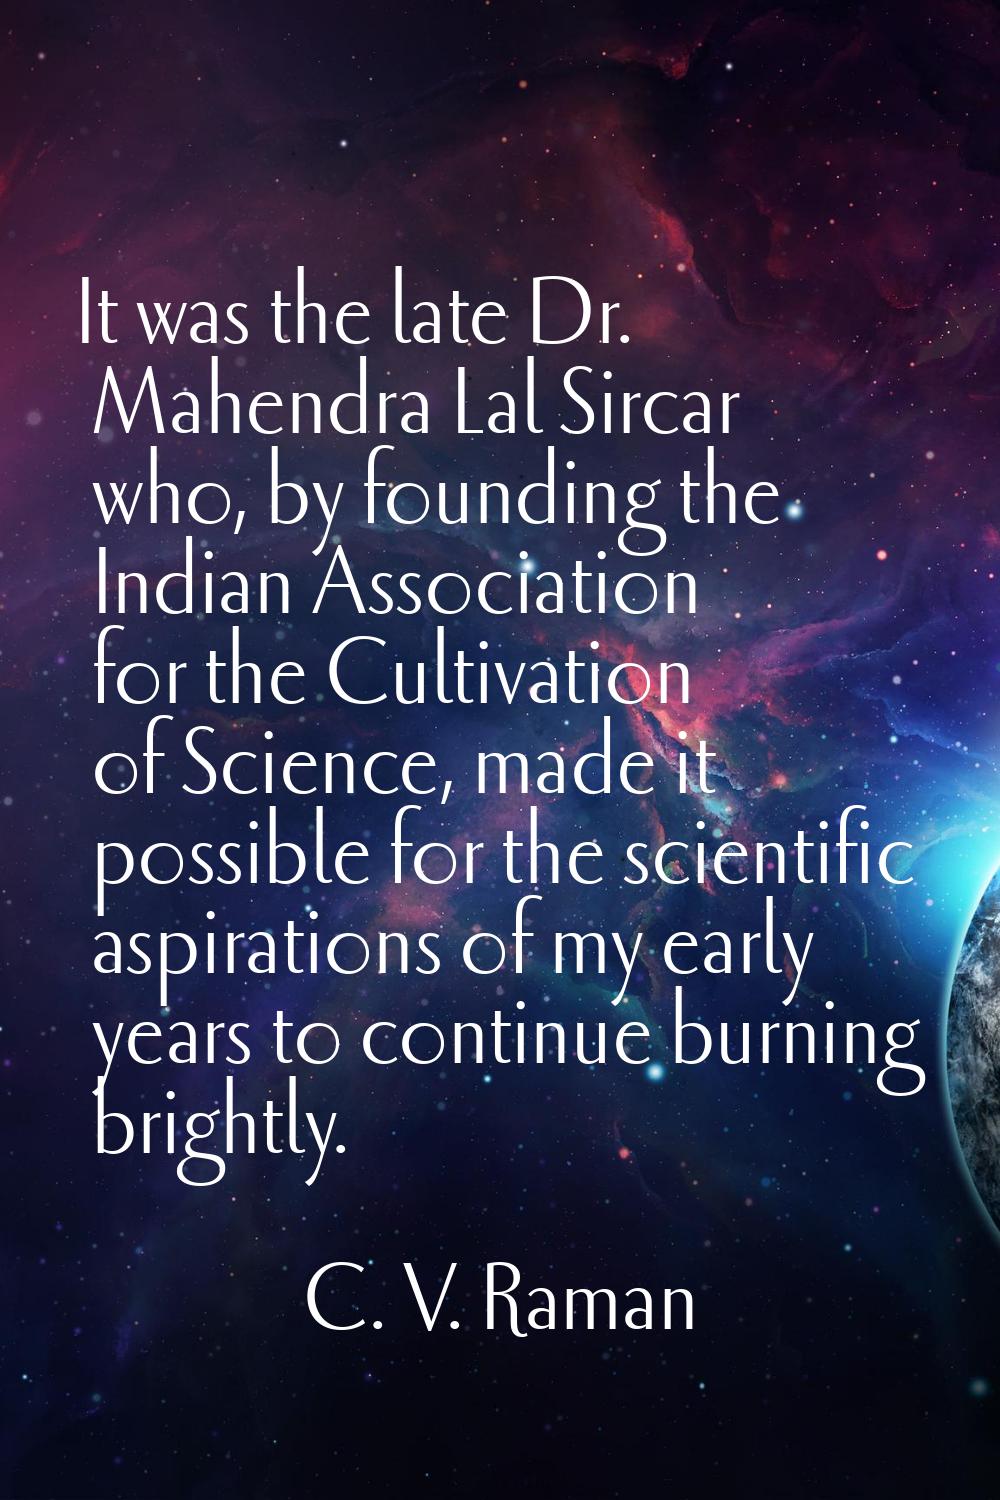 It was the late Dr. Mahendra Lal Sircar who, by founding the Indian Association for the Cultivation